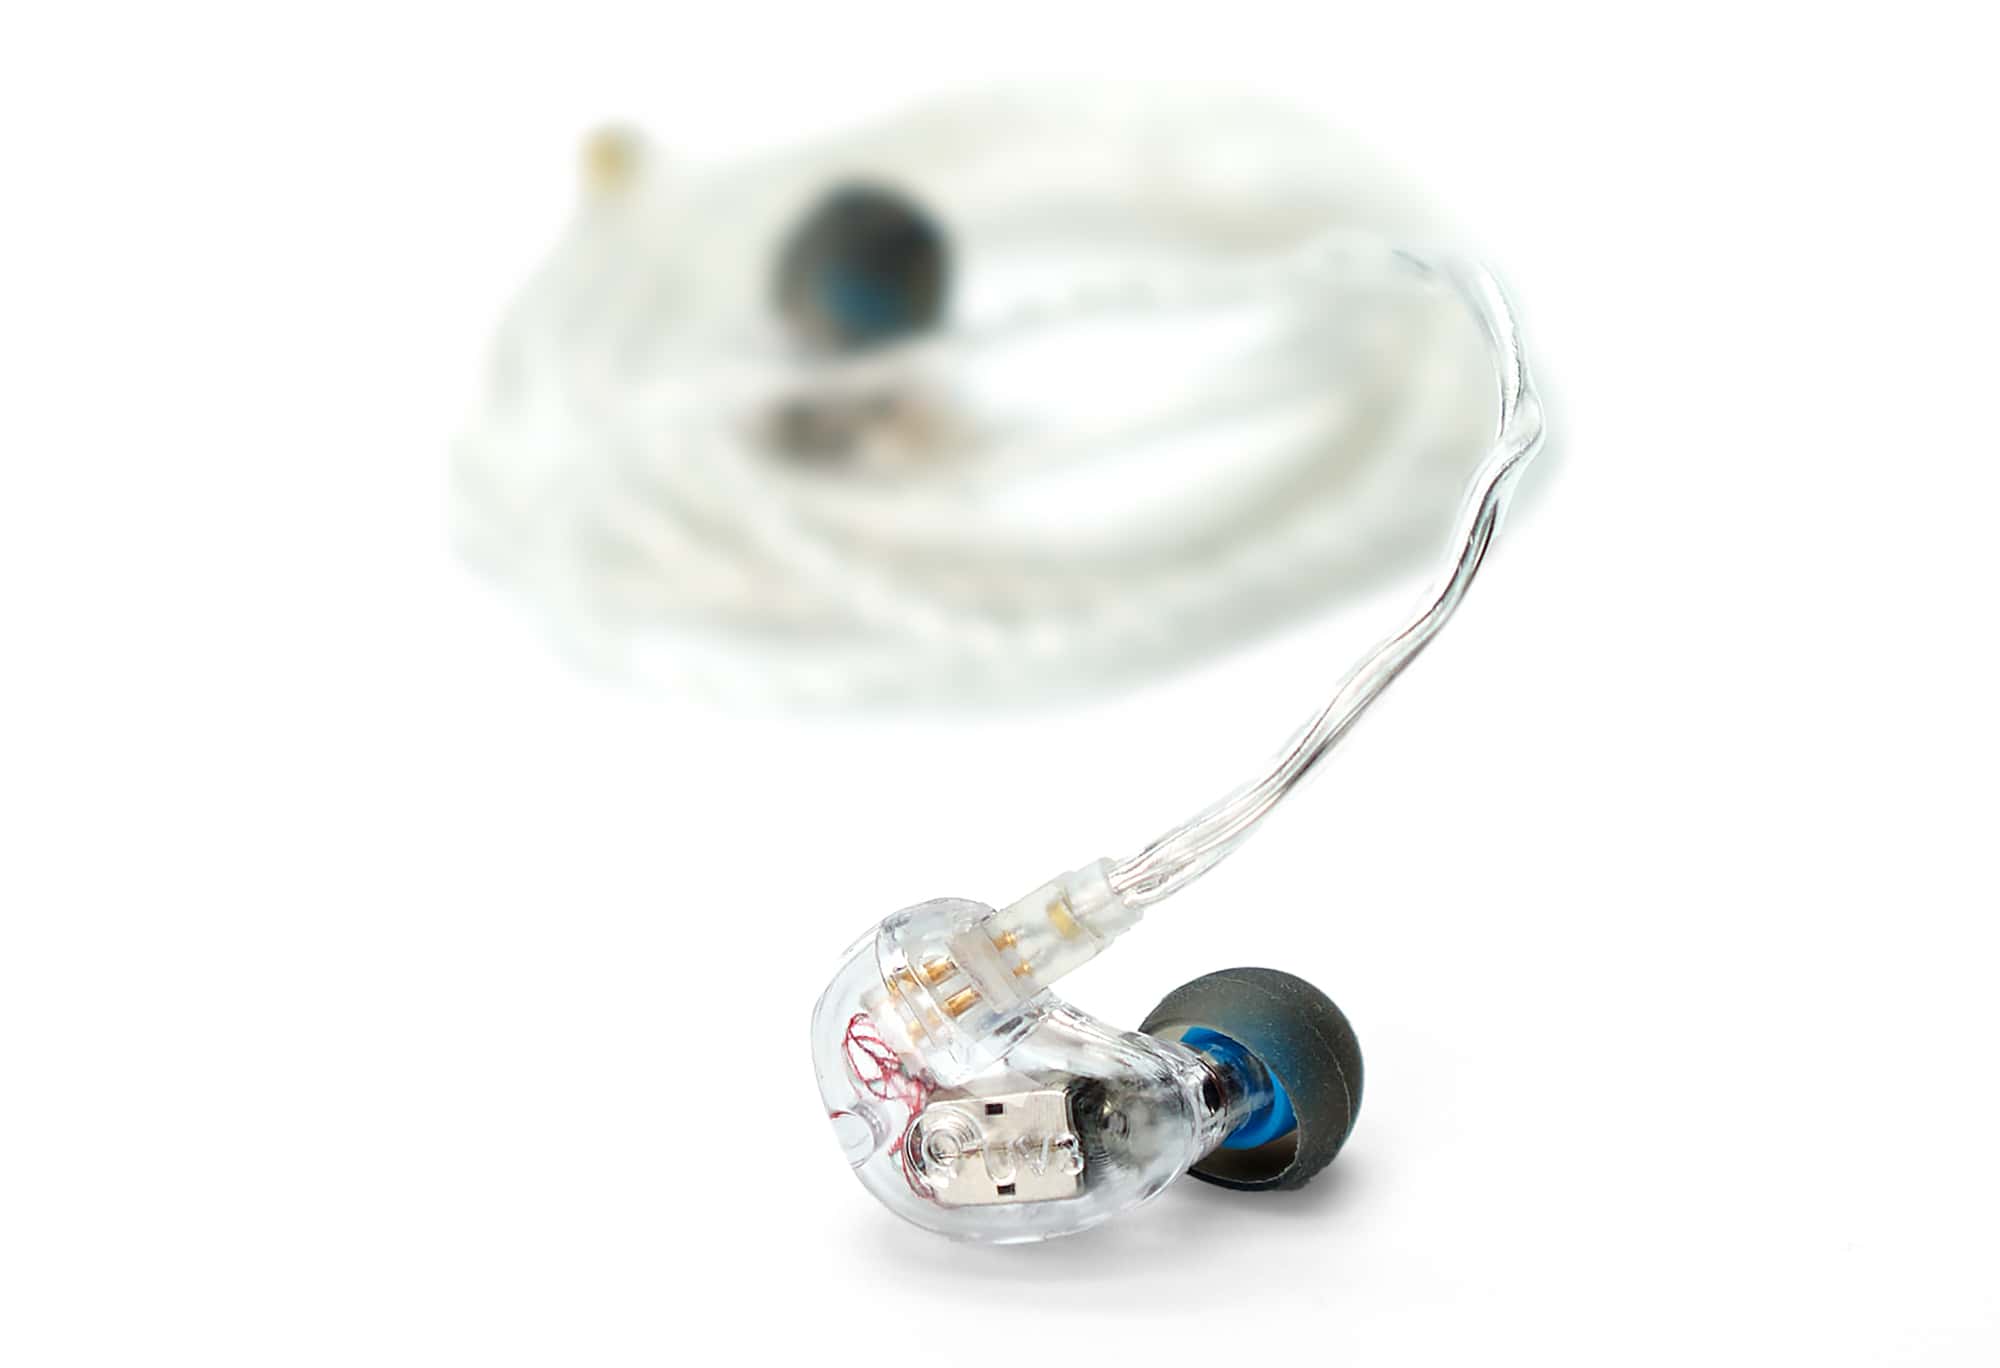 UV3 universal fit triple driver in-ear monitor for stage musicians and music listening - un-nested view